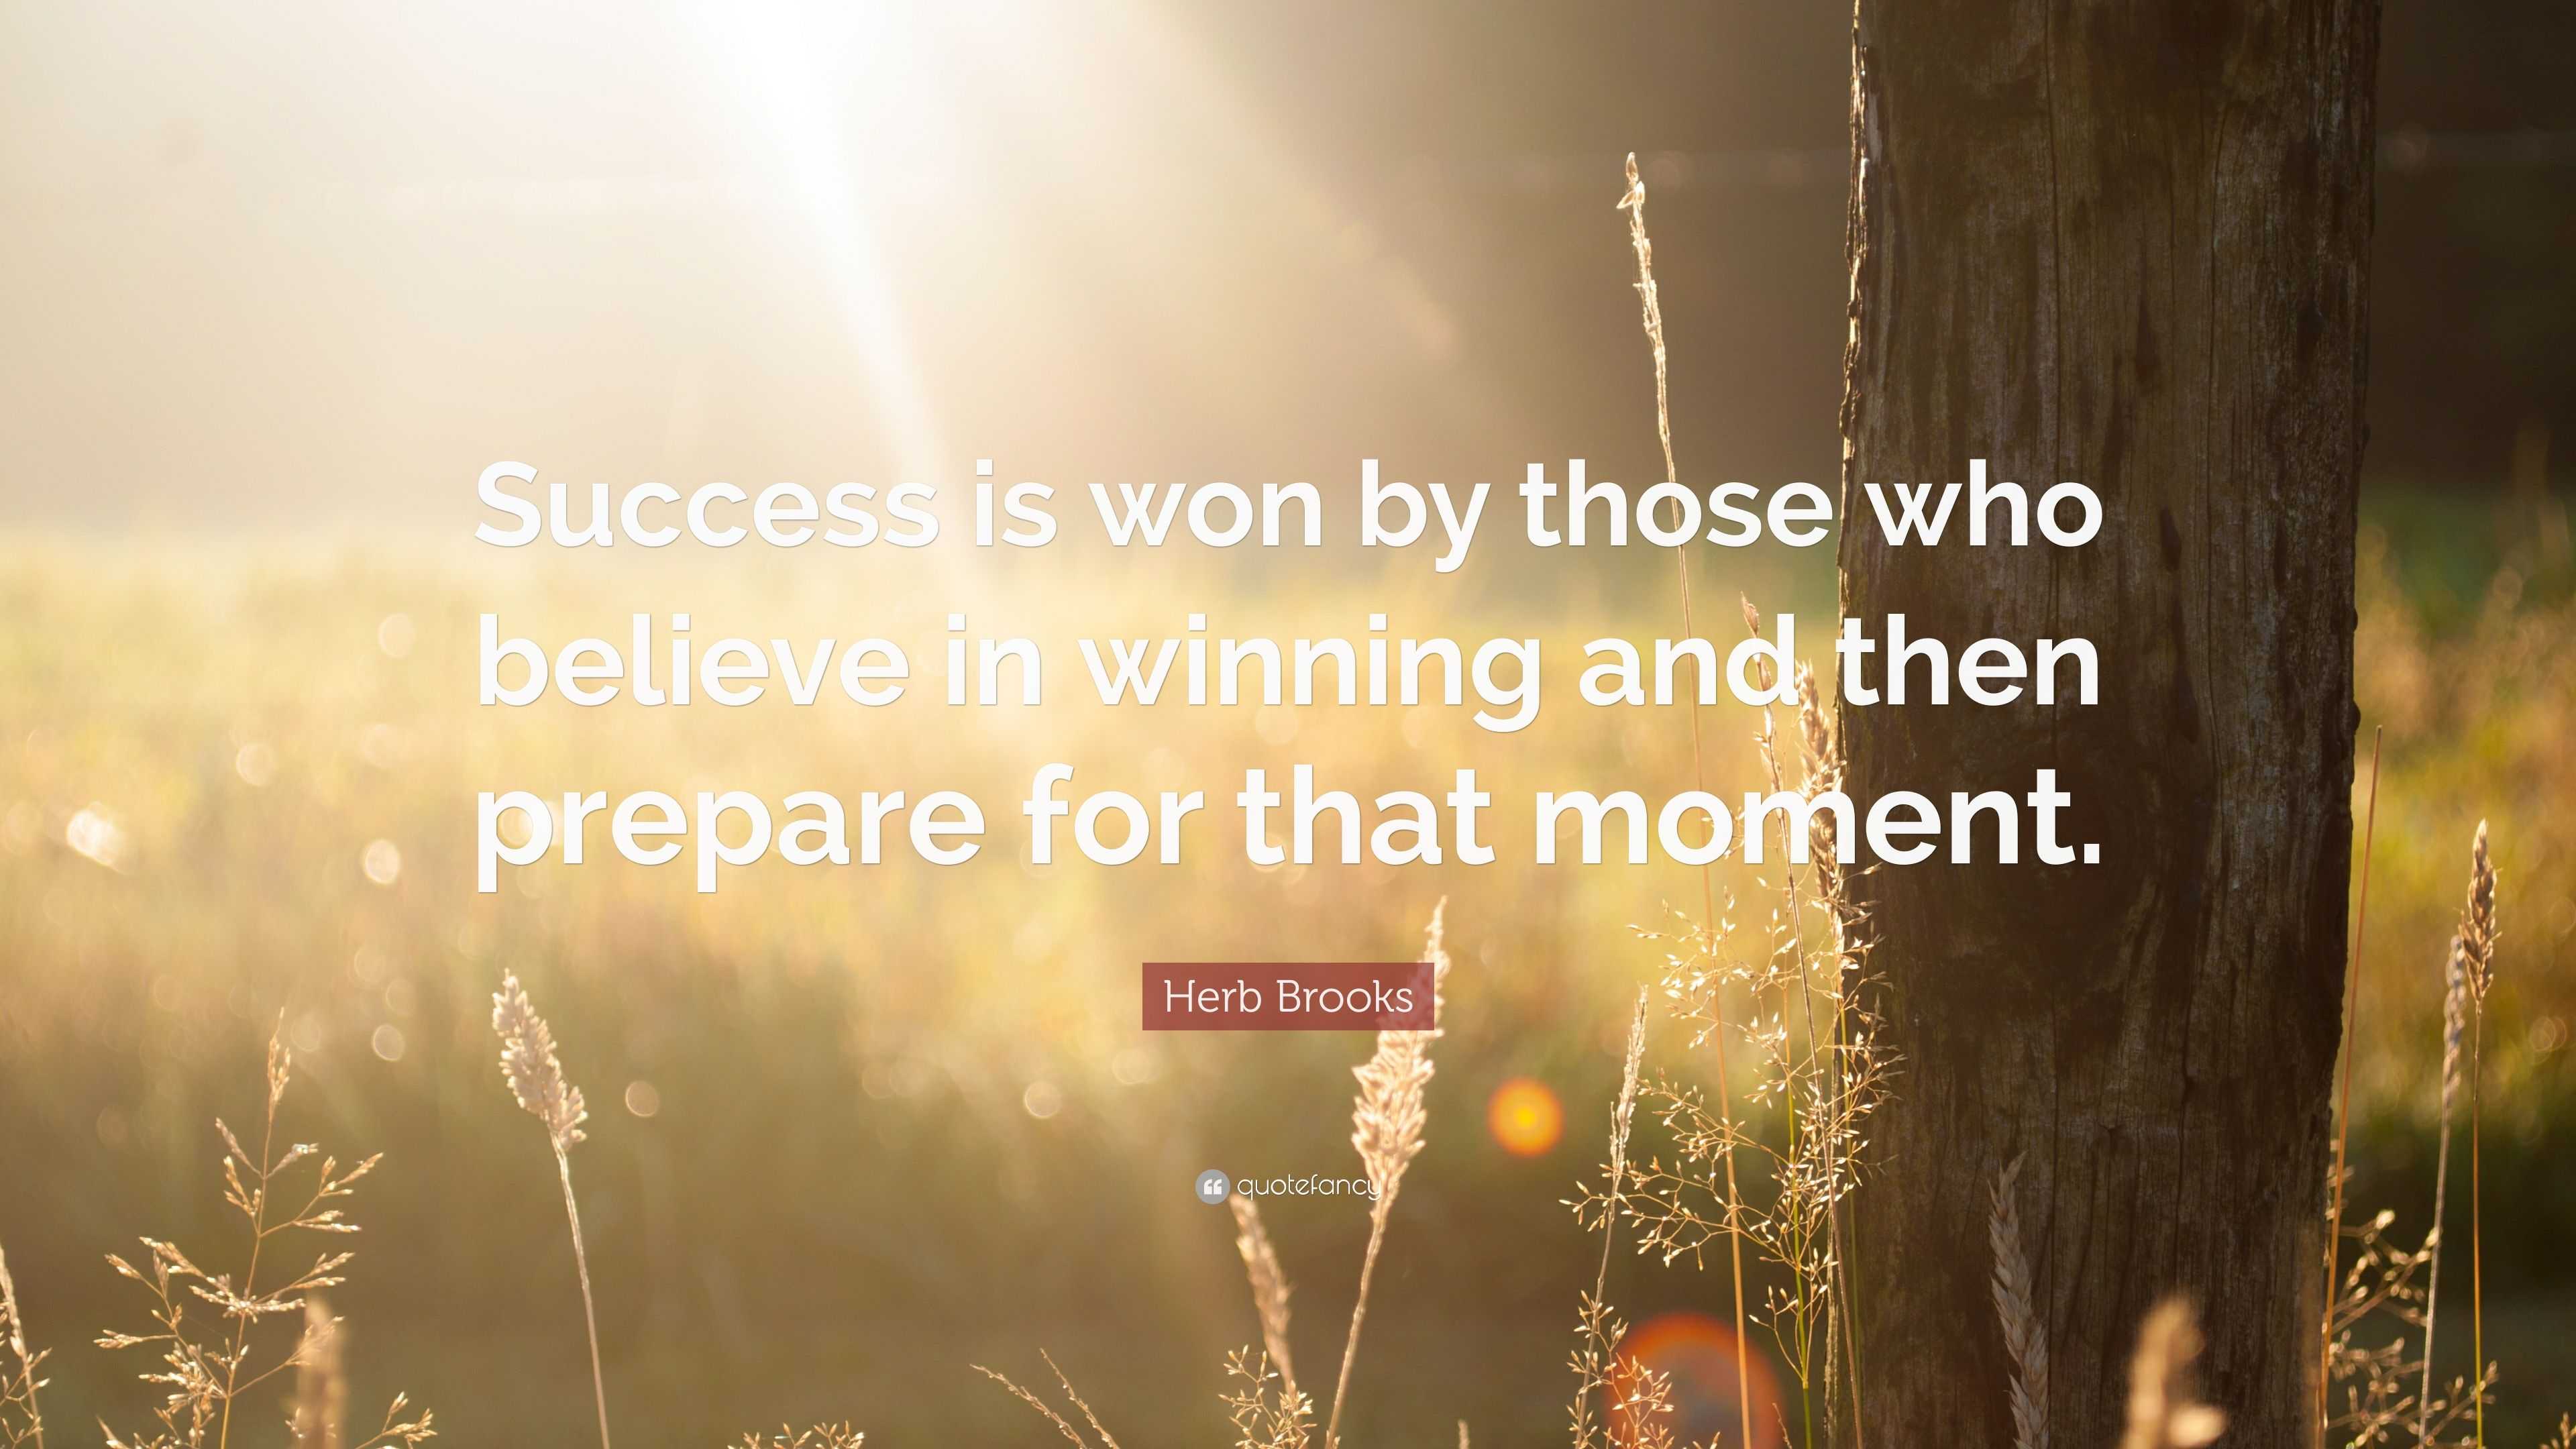 Herb Brooks Quote: “Success is won by those who believe in winning and ...